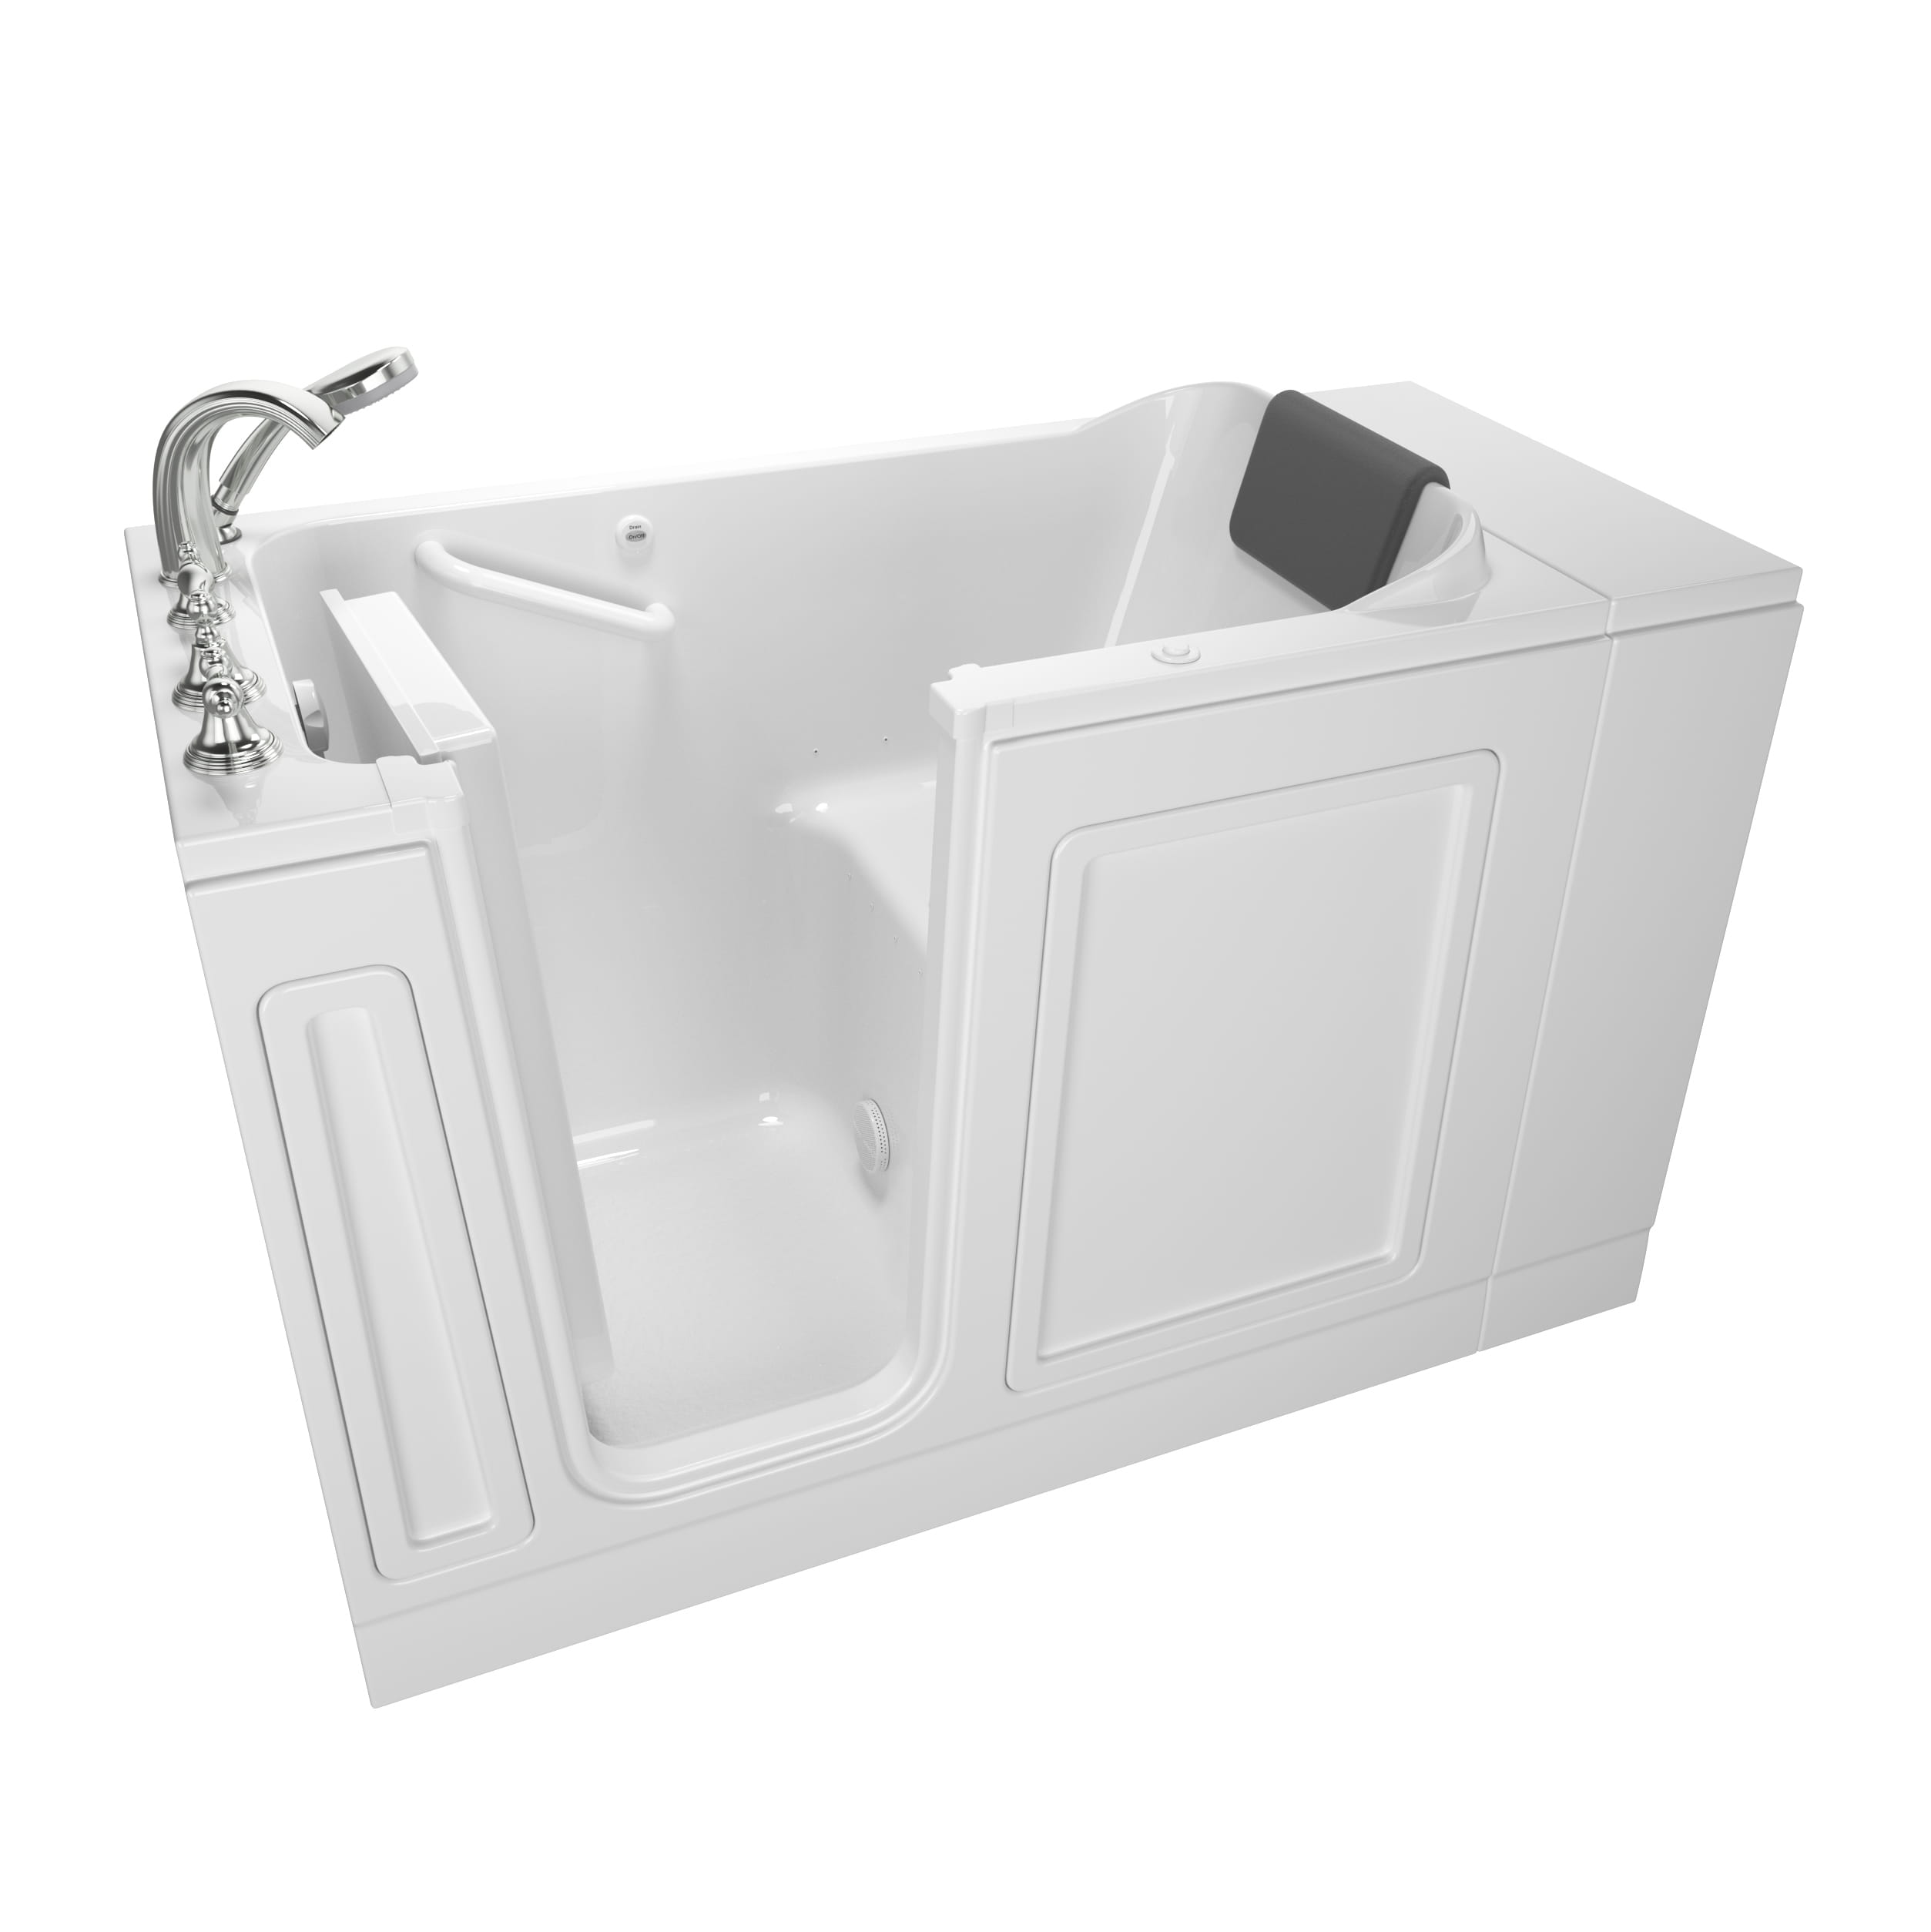 Acrylic Luxury Series 28 x 48 Inch Walk in Tub With Air Spa System   Left Hand Drain With Faucet WIB WHITE